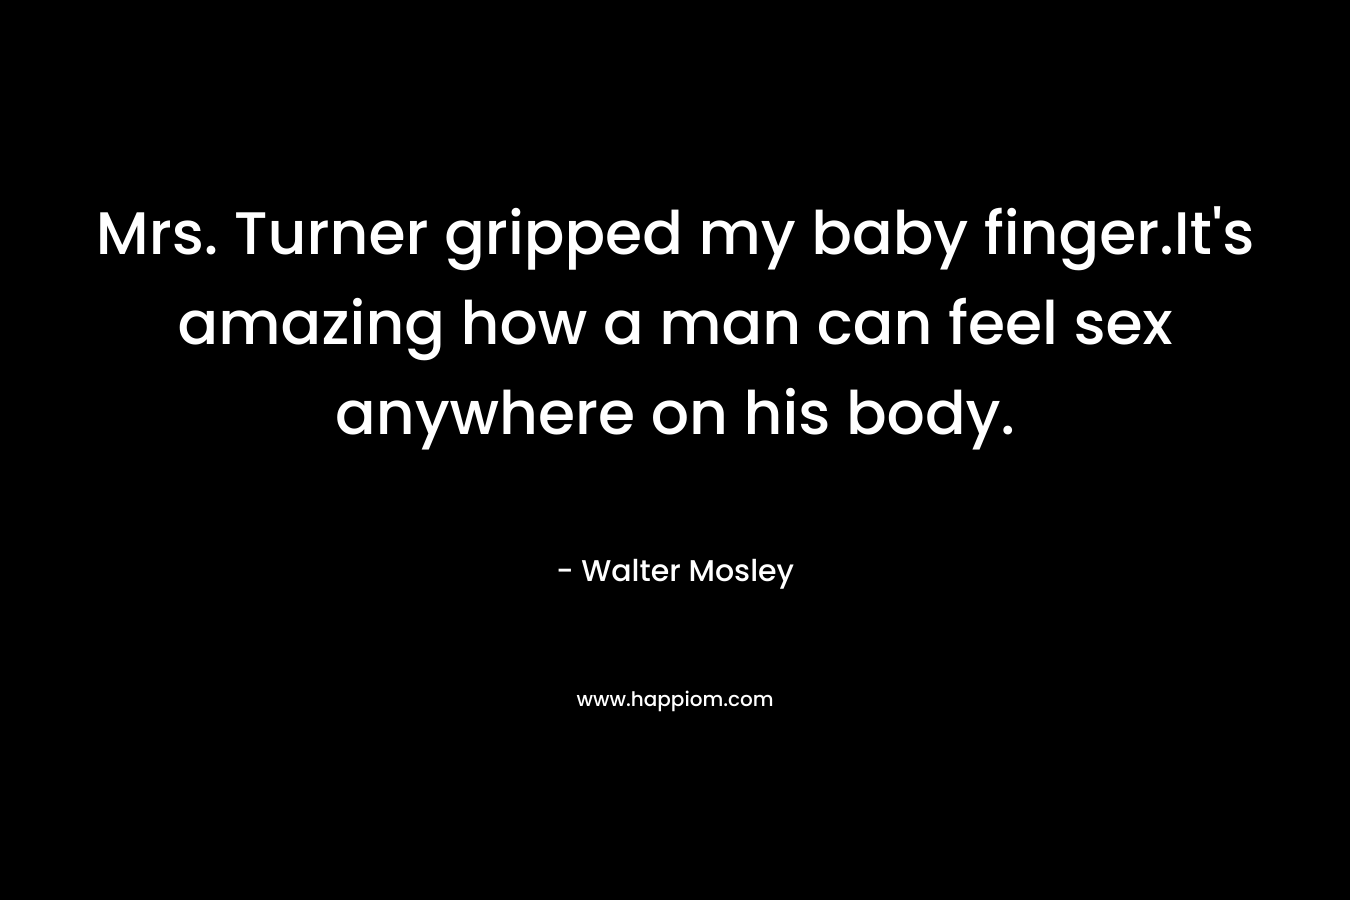 Mrs. Turner gripped my baby finger.It’s amazing how a man can feel sex anywhere on his body. – Walter Mosley